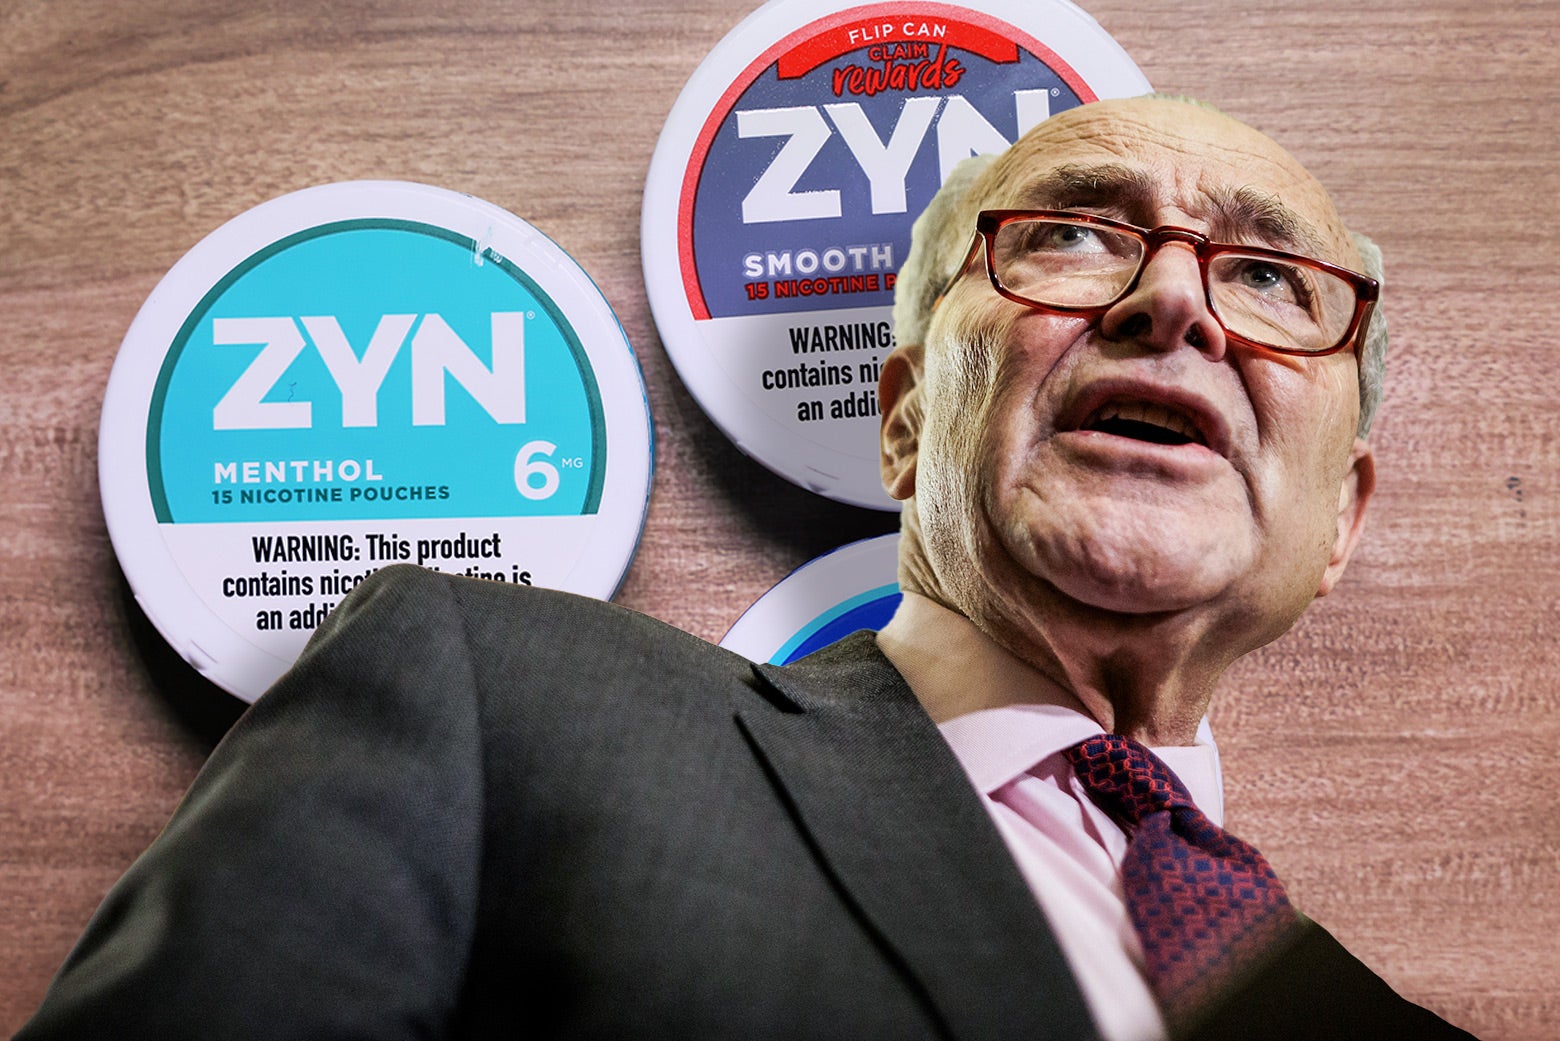 What Chuck Schumer Doesn’t Understand About Zyn